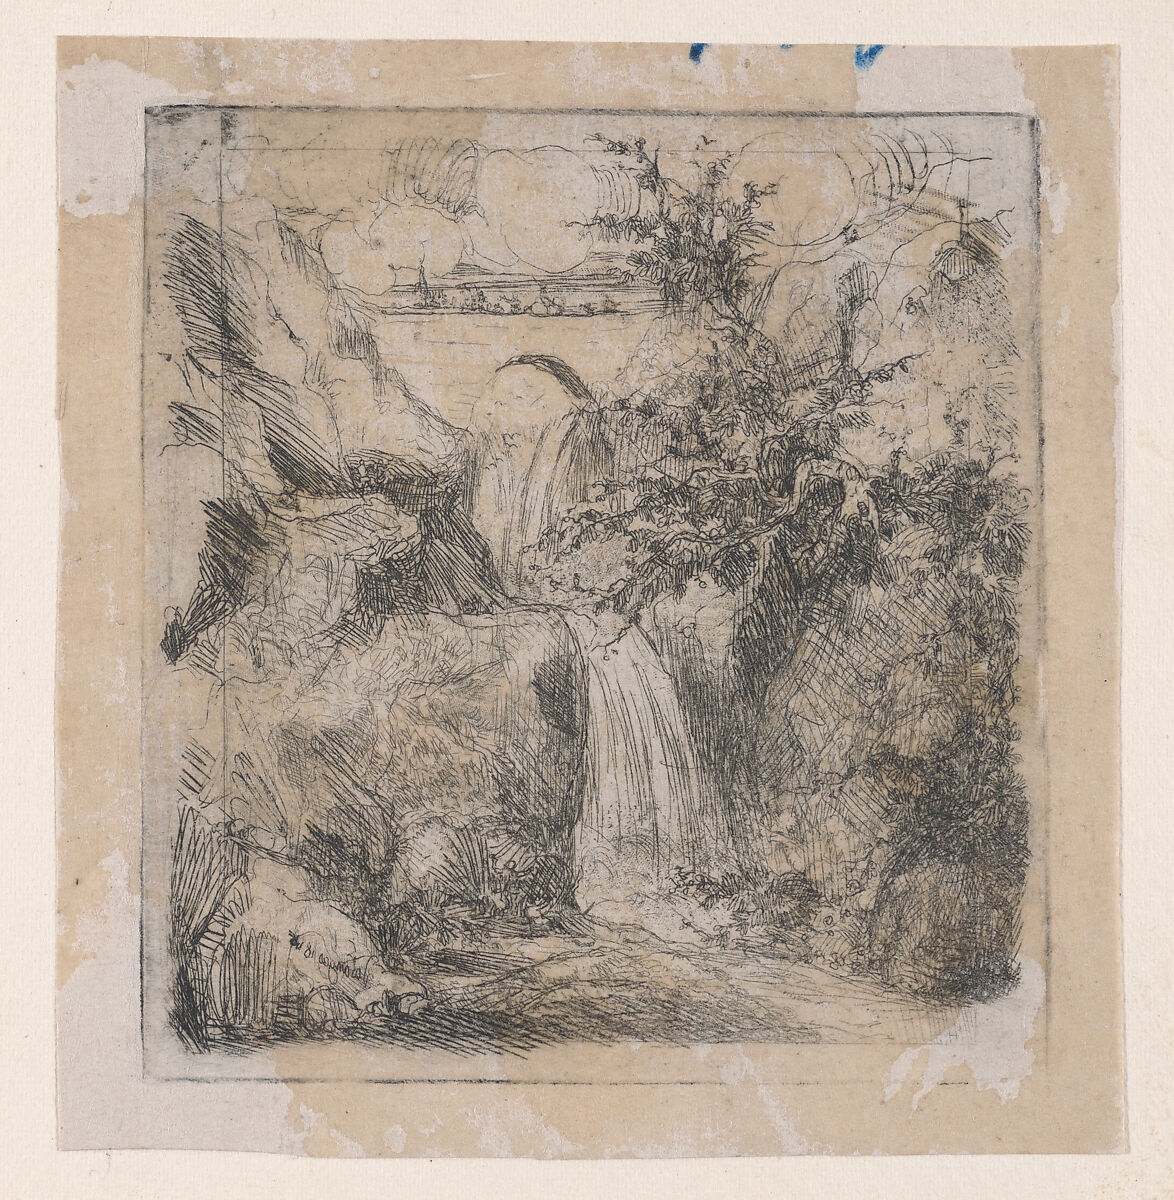 Les Cascades (The Waterfalls), Rodolphe Bresdin (French, Montrelais 1822–1885 Sèvres), Etching 